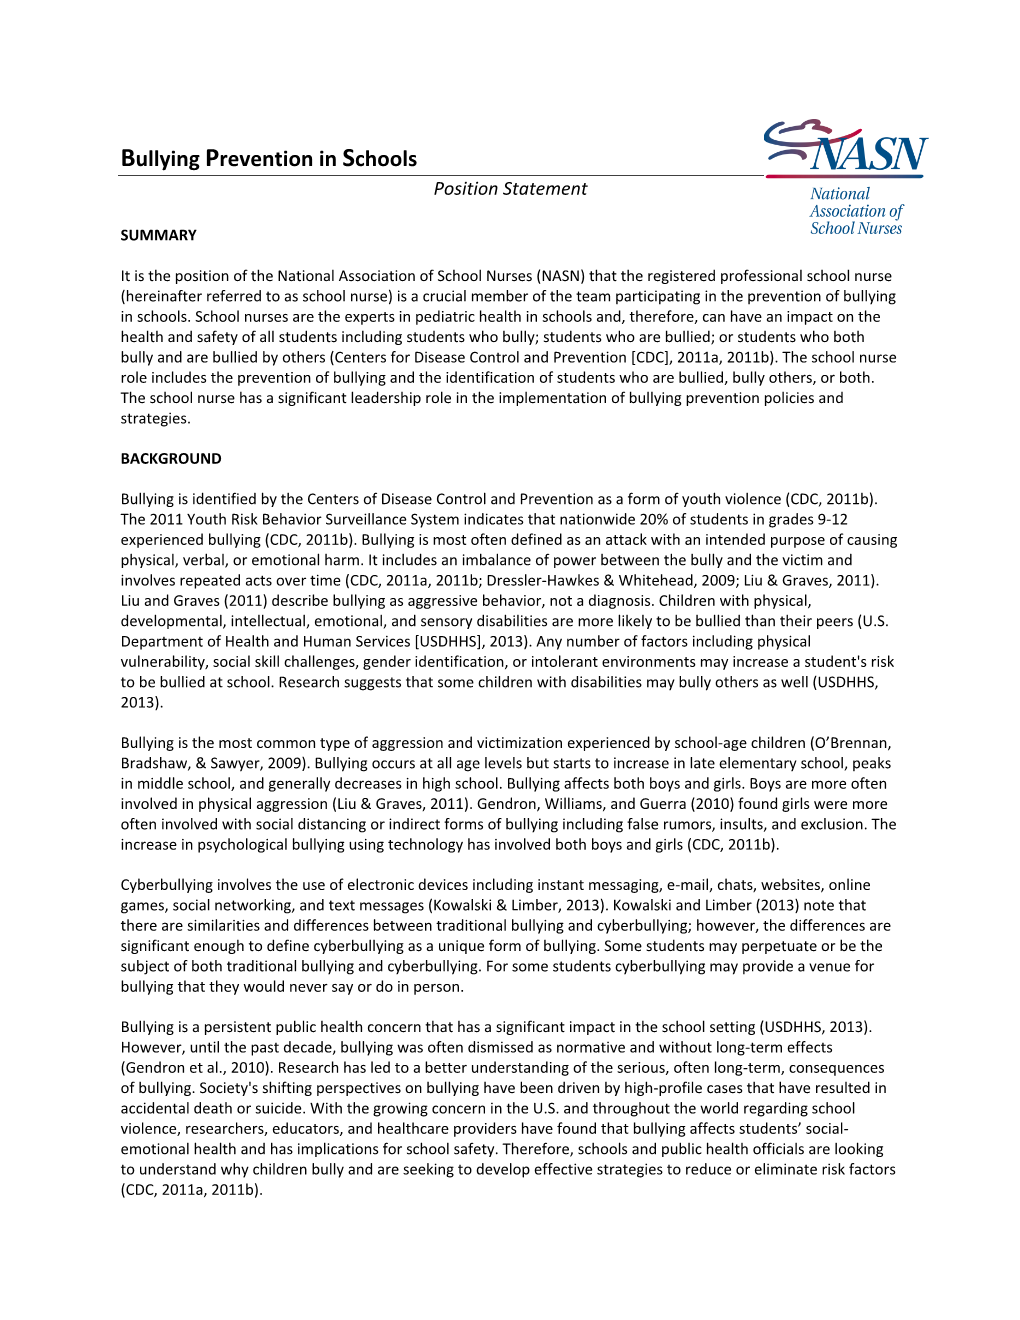 Bullying Prevention in Schools Position Statement